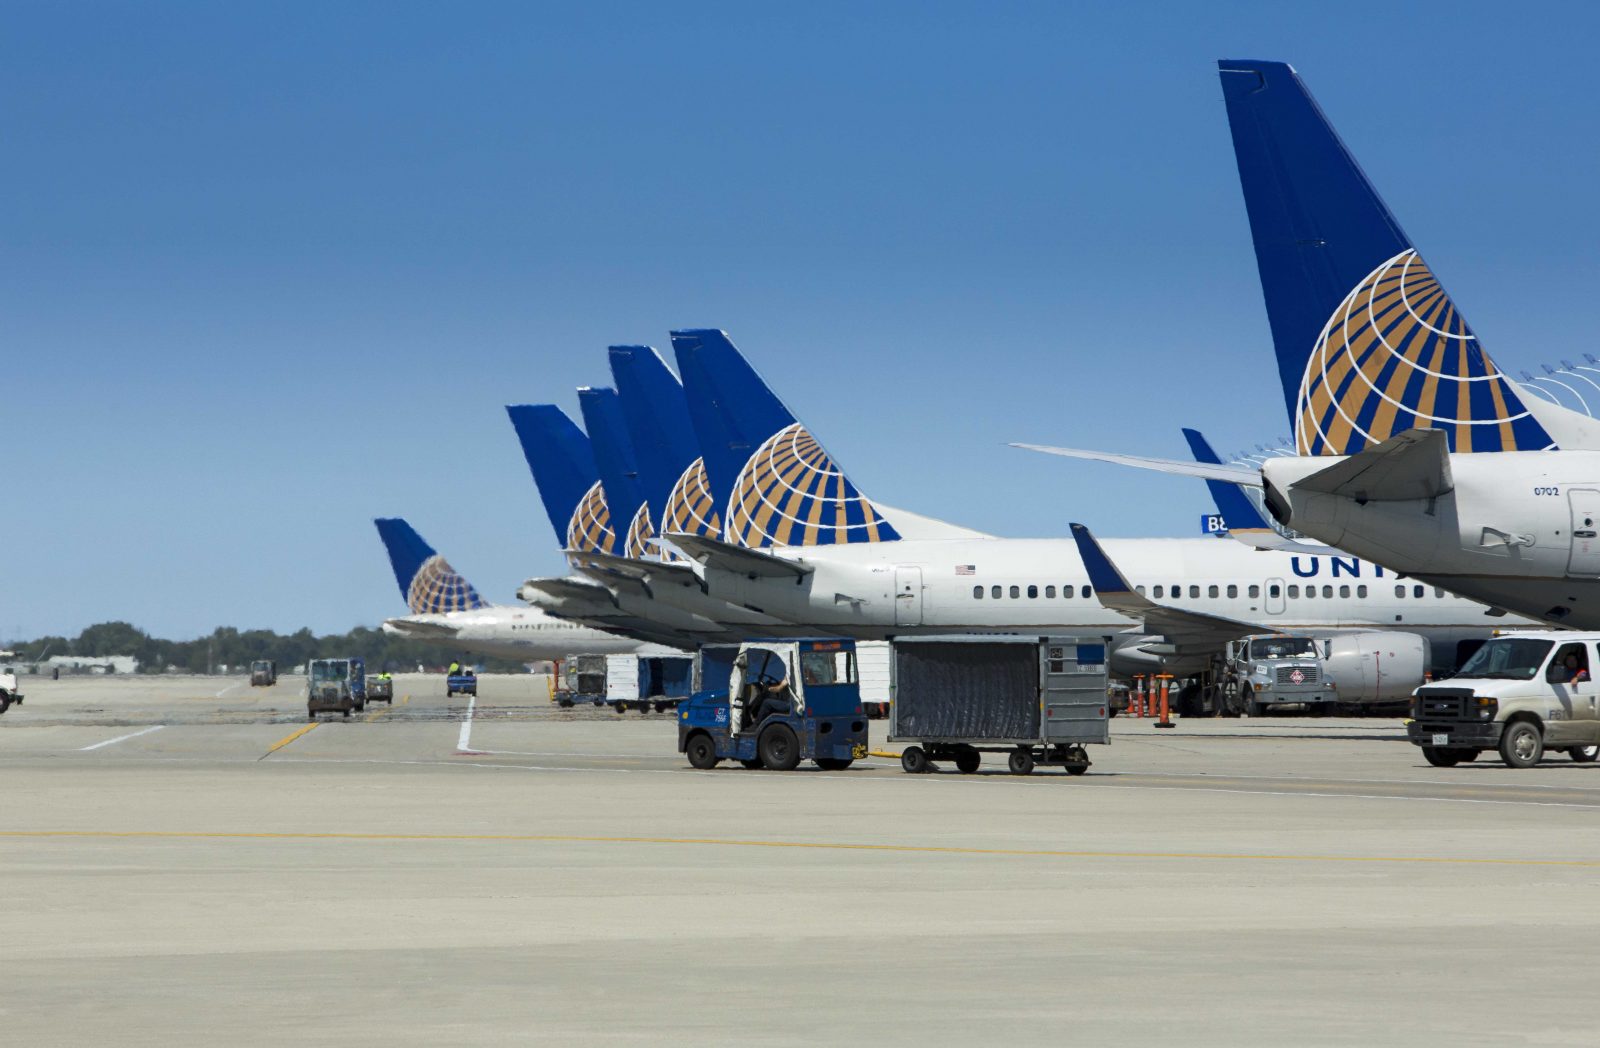 United Airlines Makes Top Ten of Companies to Have Suffered the Costliest Ever PR Disasters